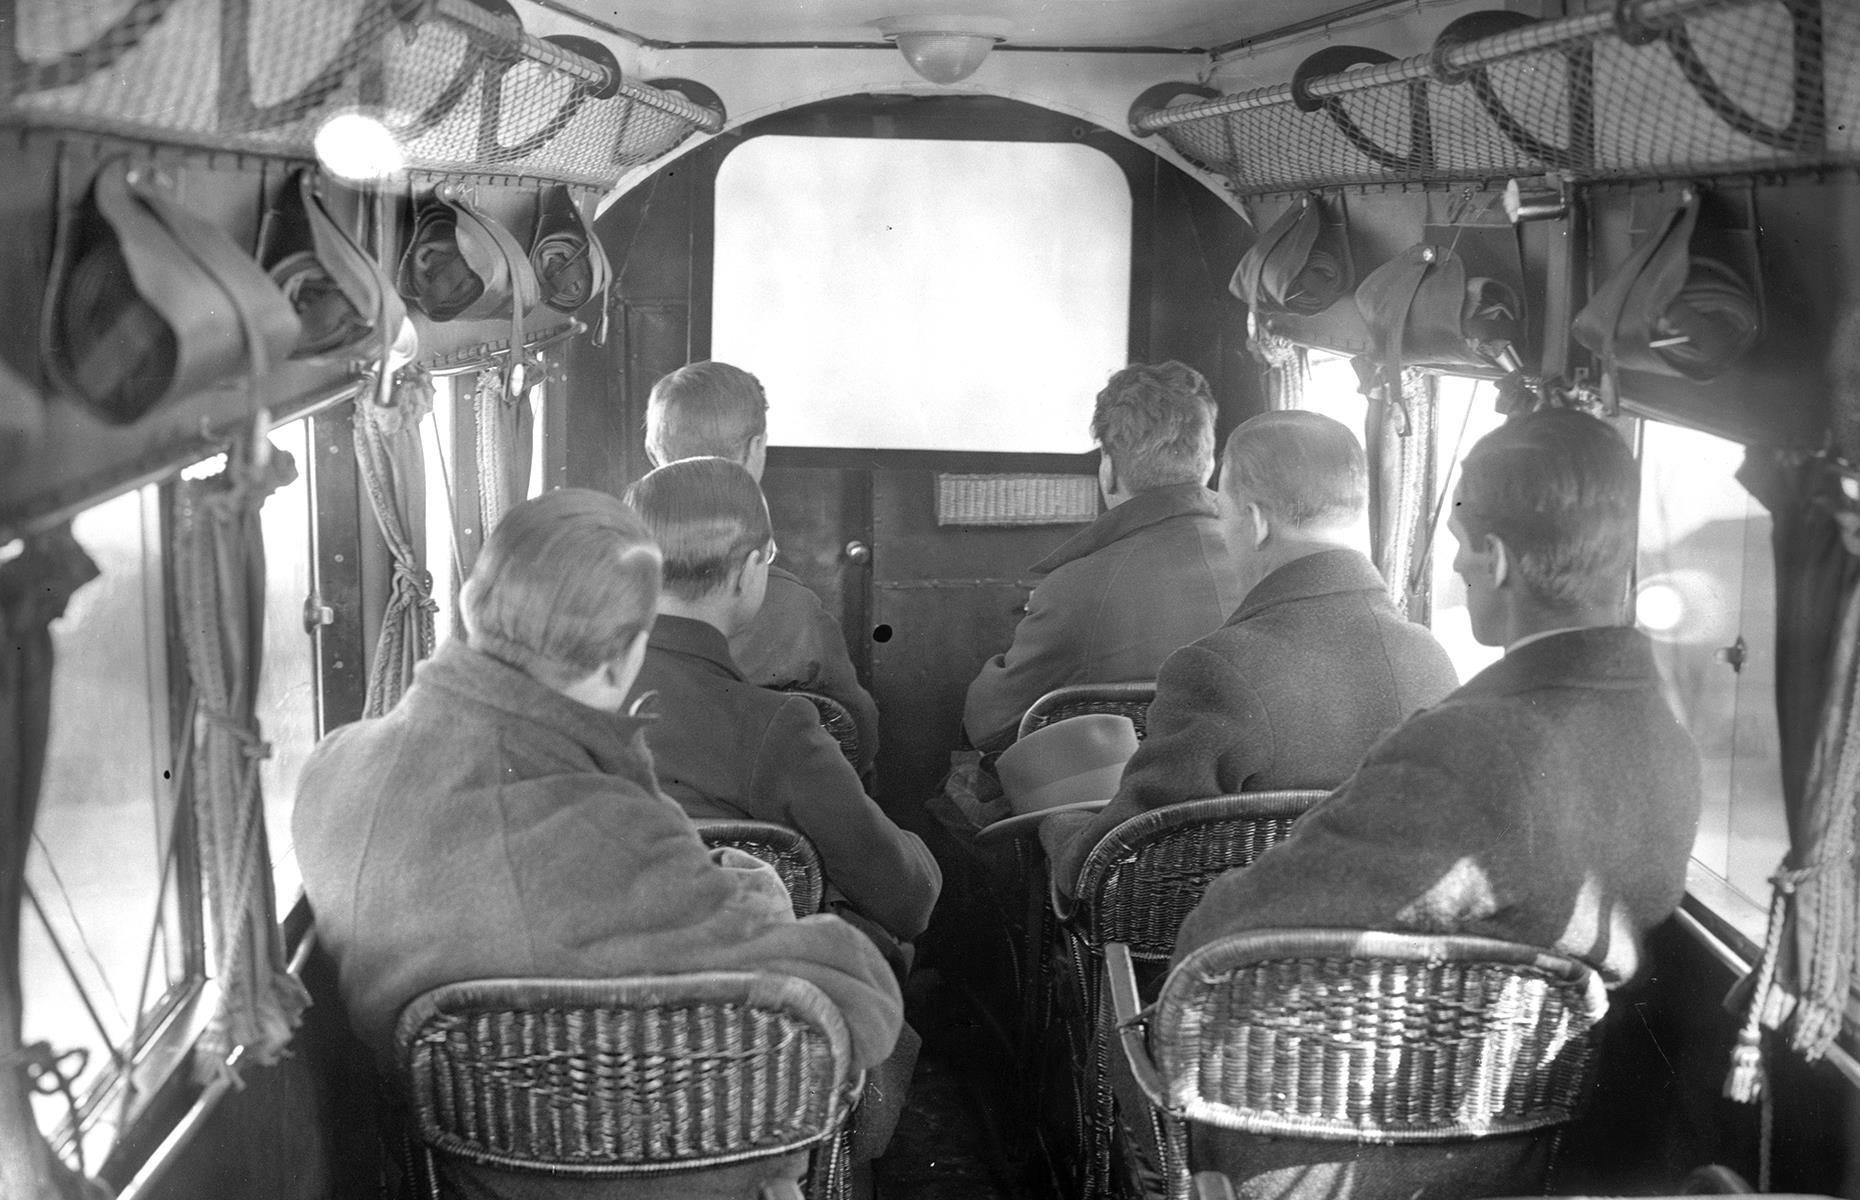 <p>In-flight entertainment systems looked rather different too. Today airplane entertainment is a solitary, hi-tech affair but, in the early days of flight, passengers would typically gather around a single screen if they wanted to catch a movie. One of the earliest films to be shown up high was Sir Arthur Conan Doyle's <em>The Lost World</em> in 1925 with Imperial Airways. Here, passengers on a German airliner also enjoy a movie in the year 1925.</p>